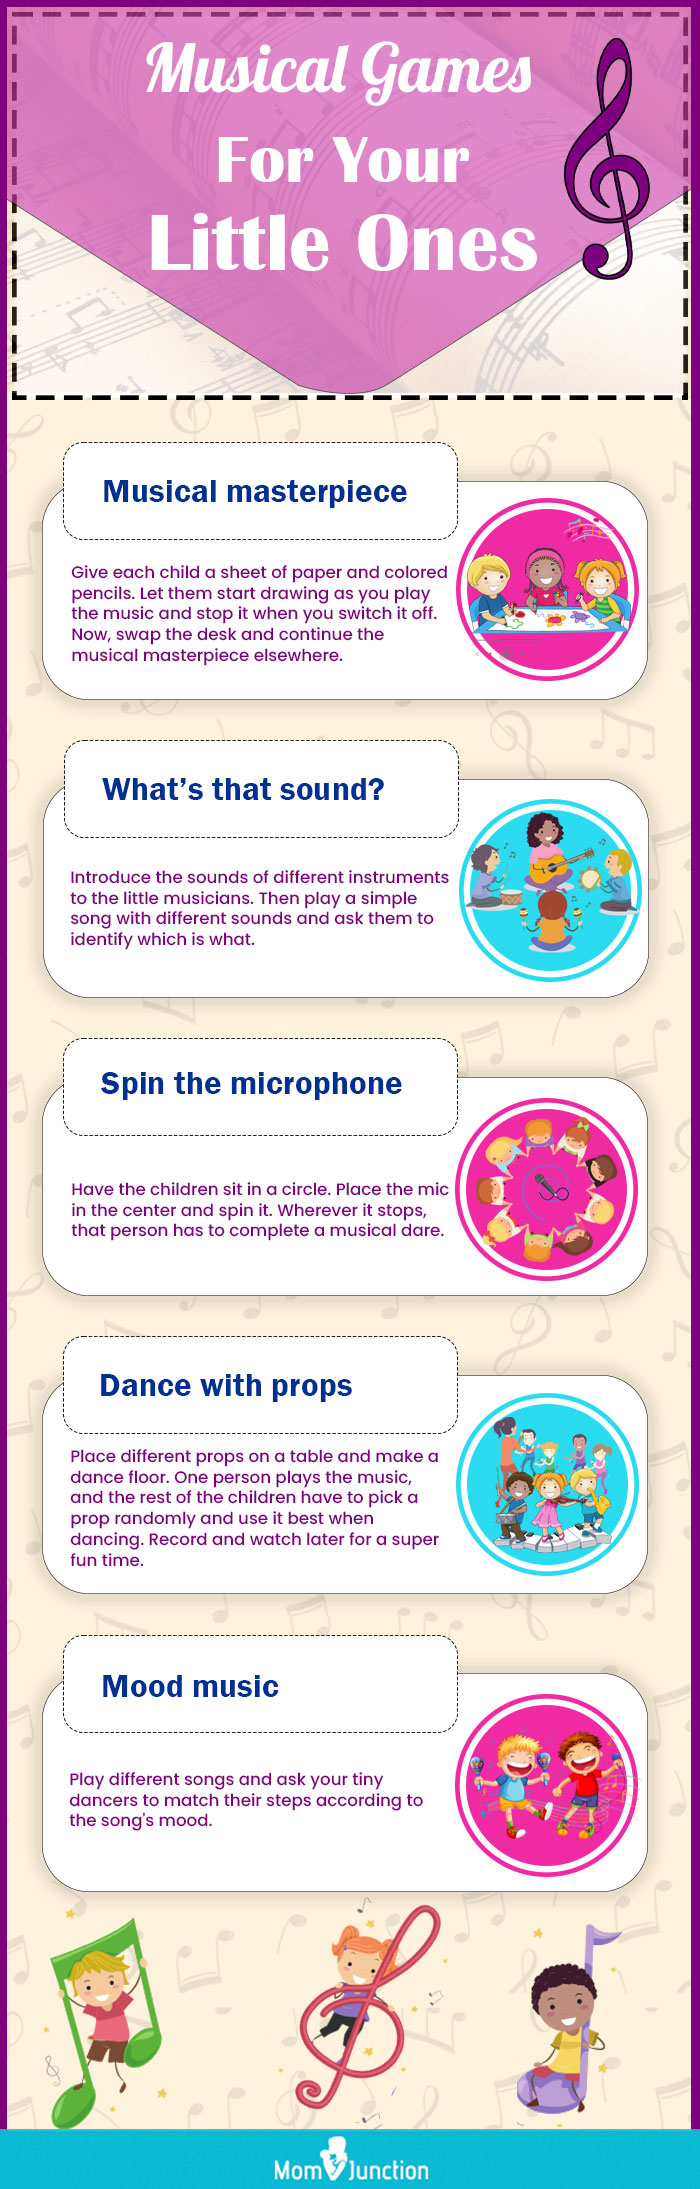 musical games for babies (infographic)